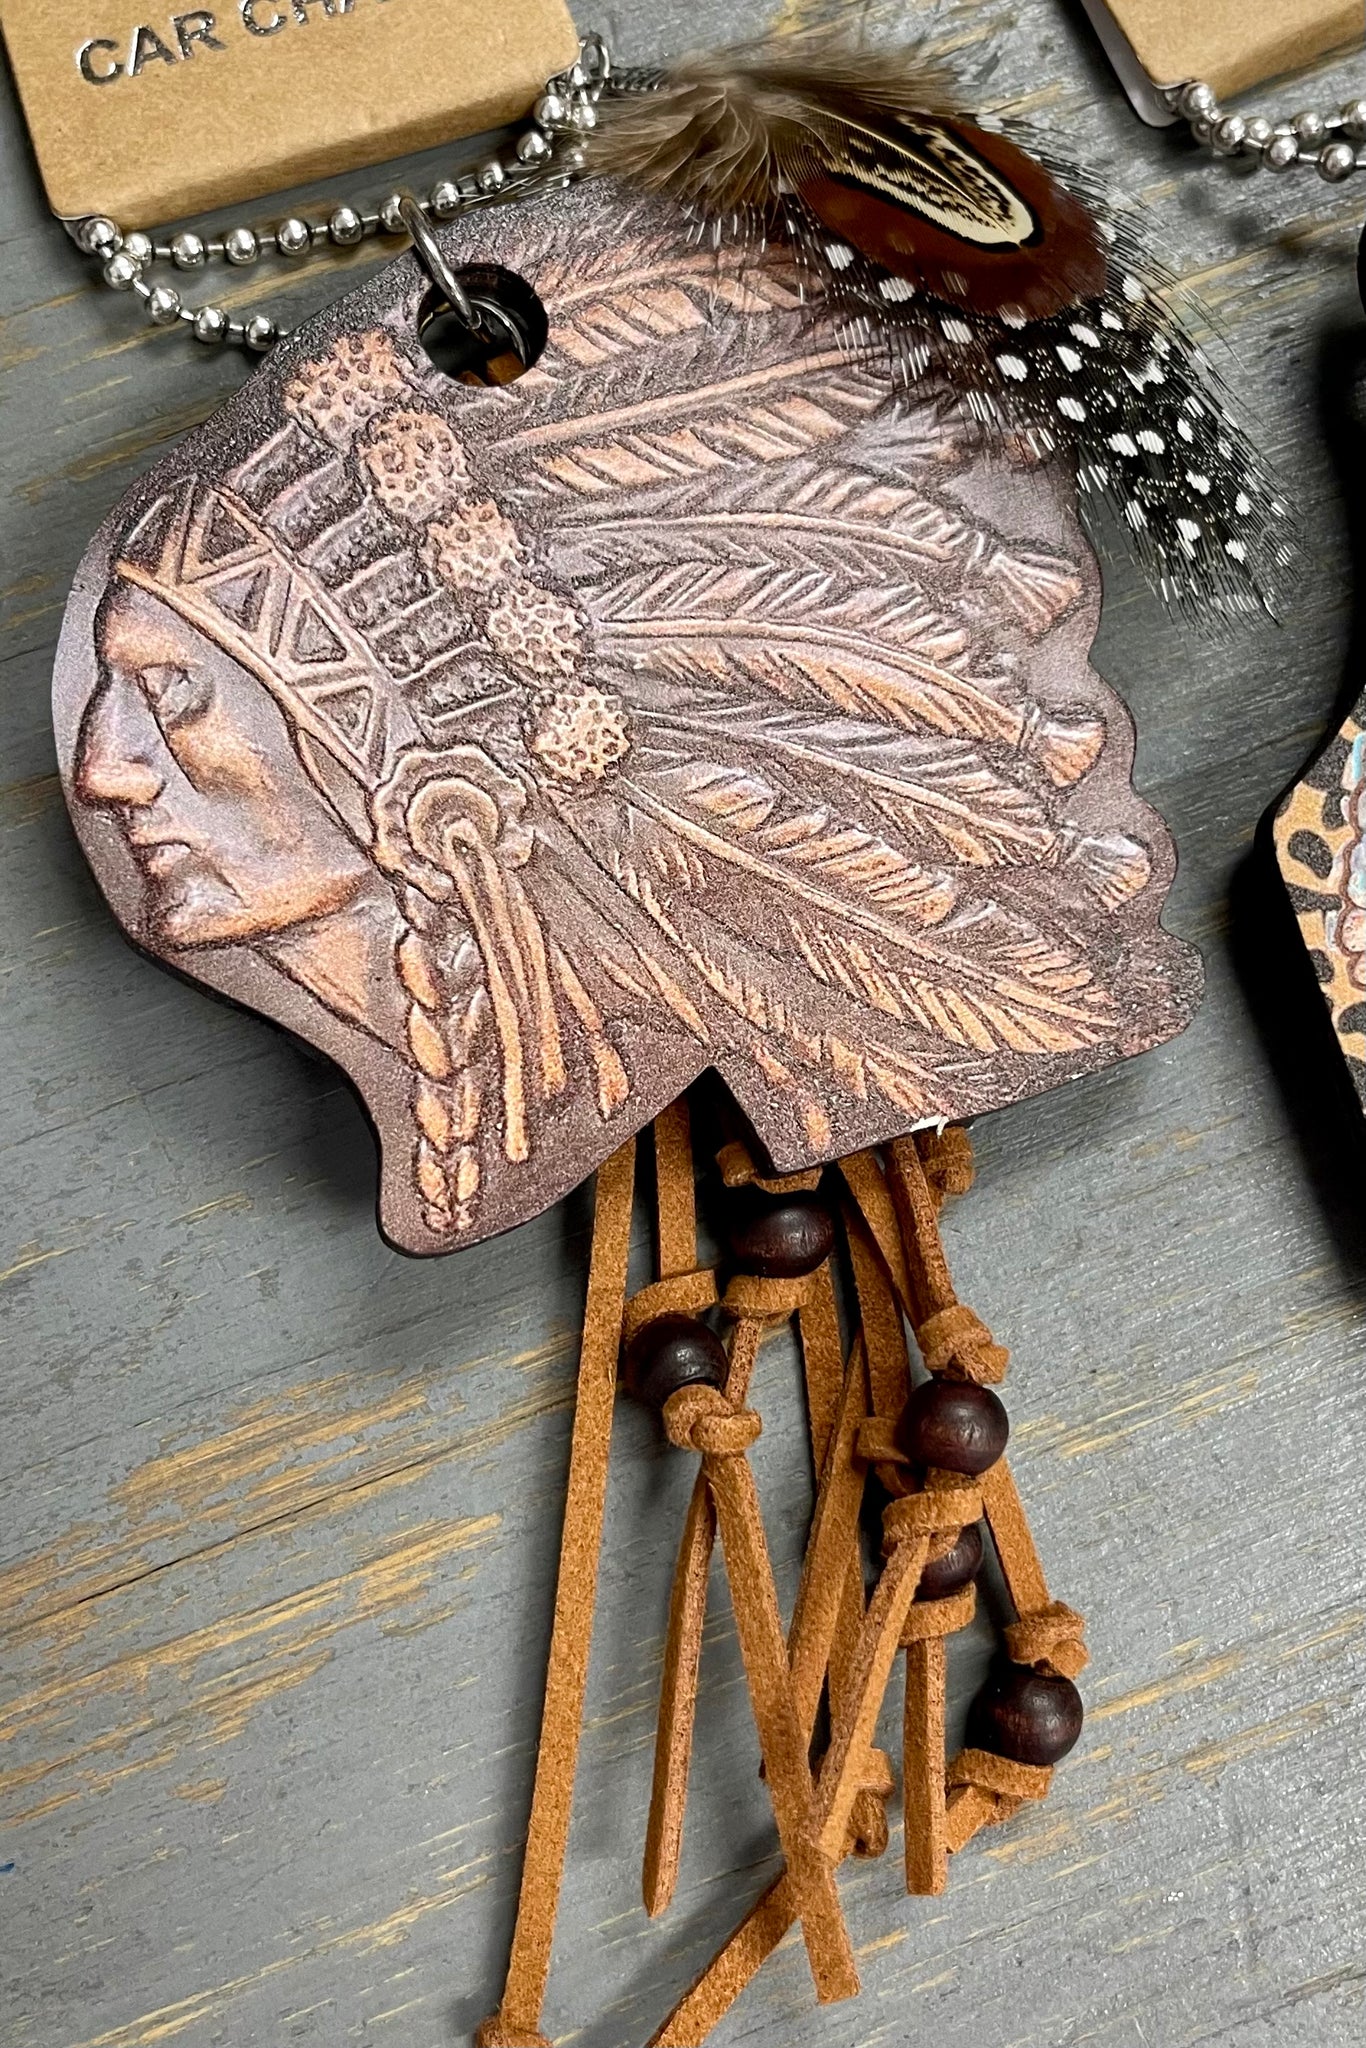 Wild Wooden Car Charms